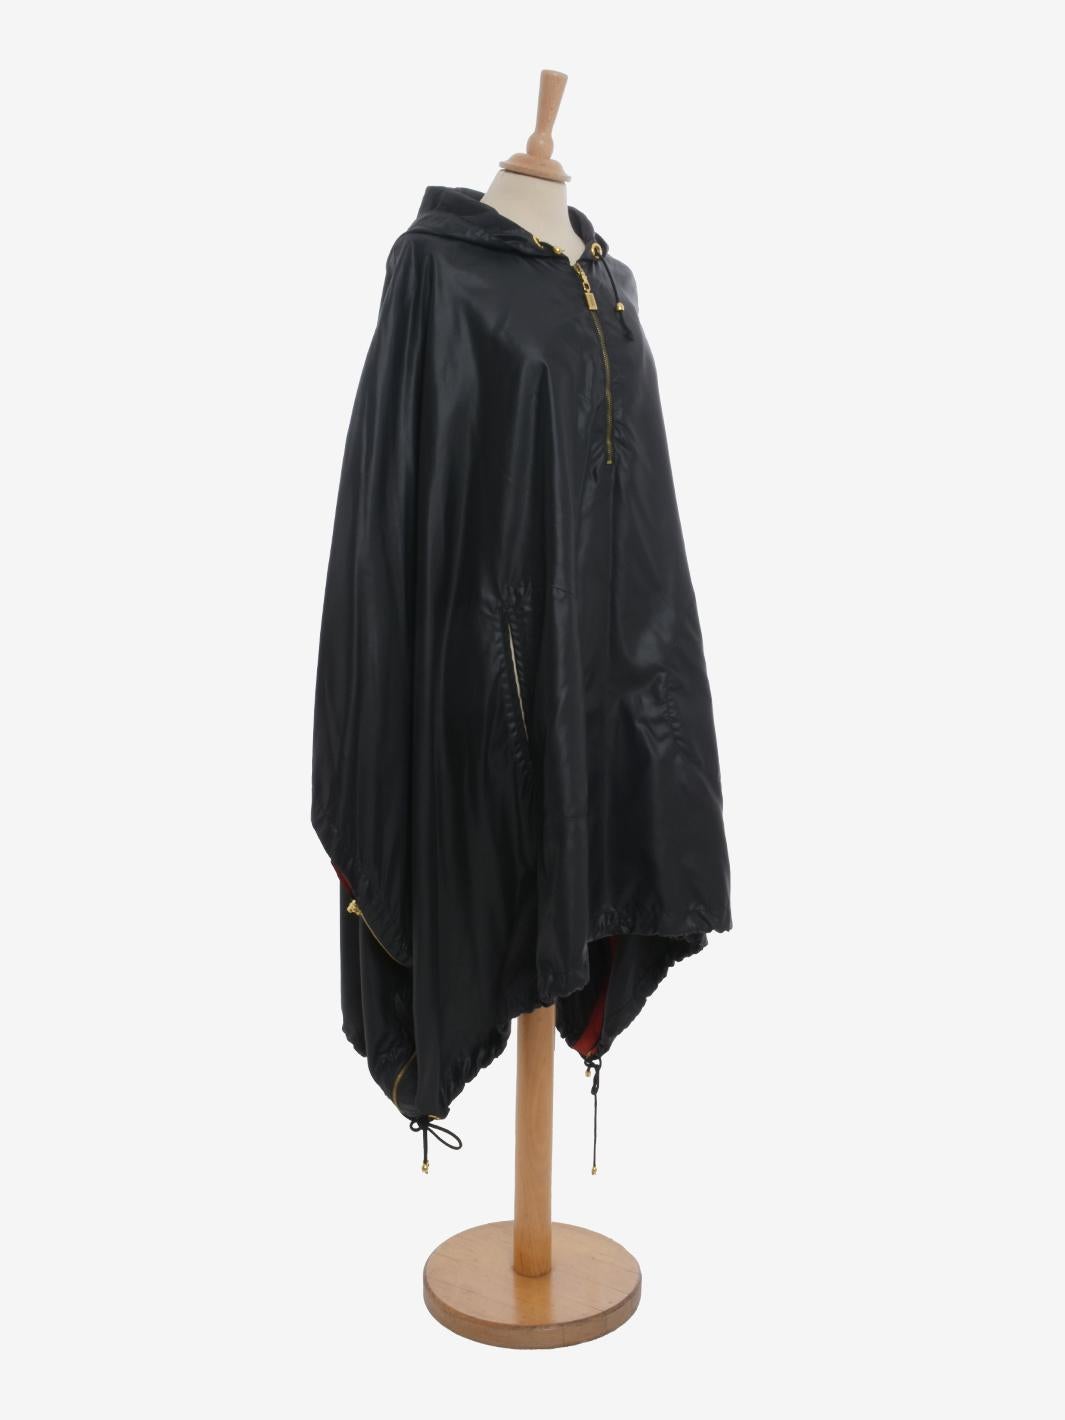 Gianfranco Ferré Raincoat - 80s In Excellent Condition For Sale In Milano, IT